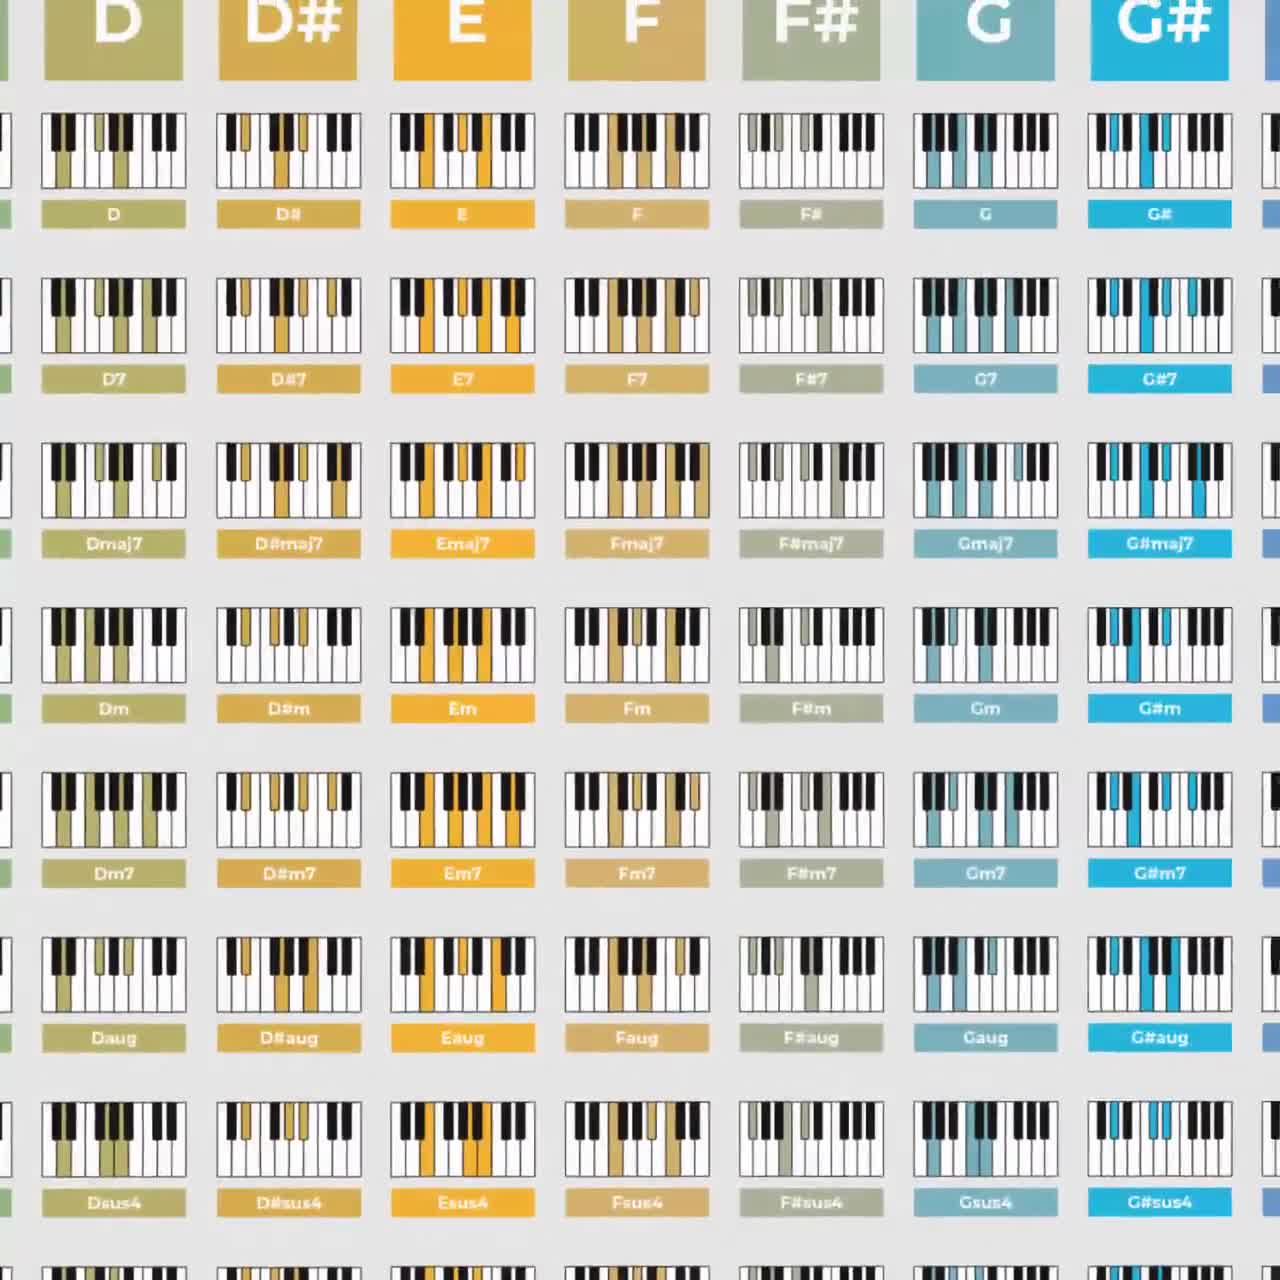 Piano Chords With Chord Suggestions - Etsy Canada